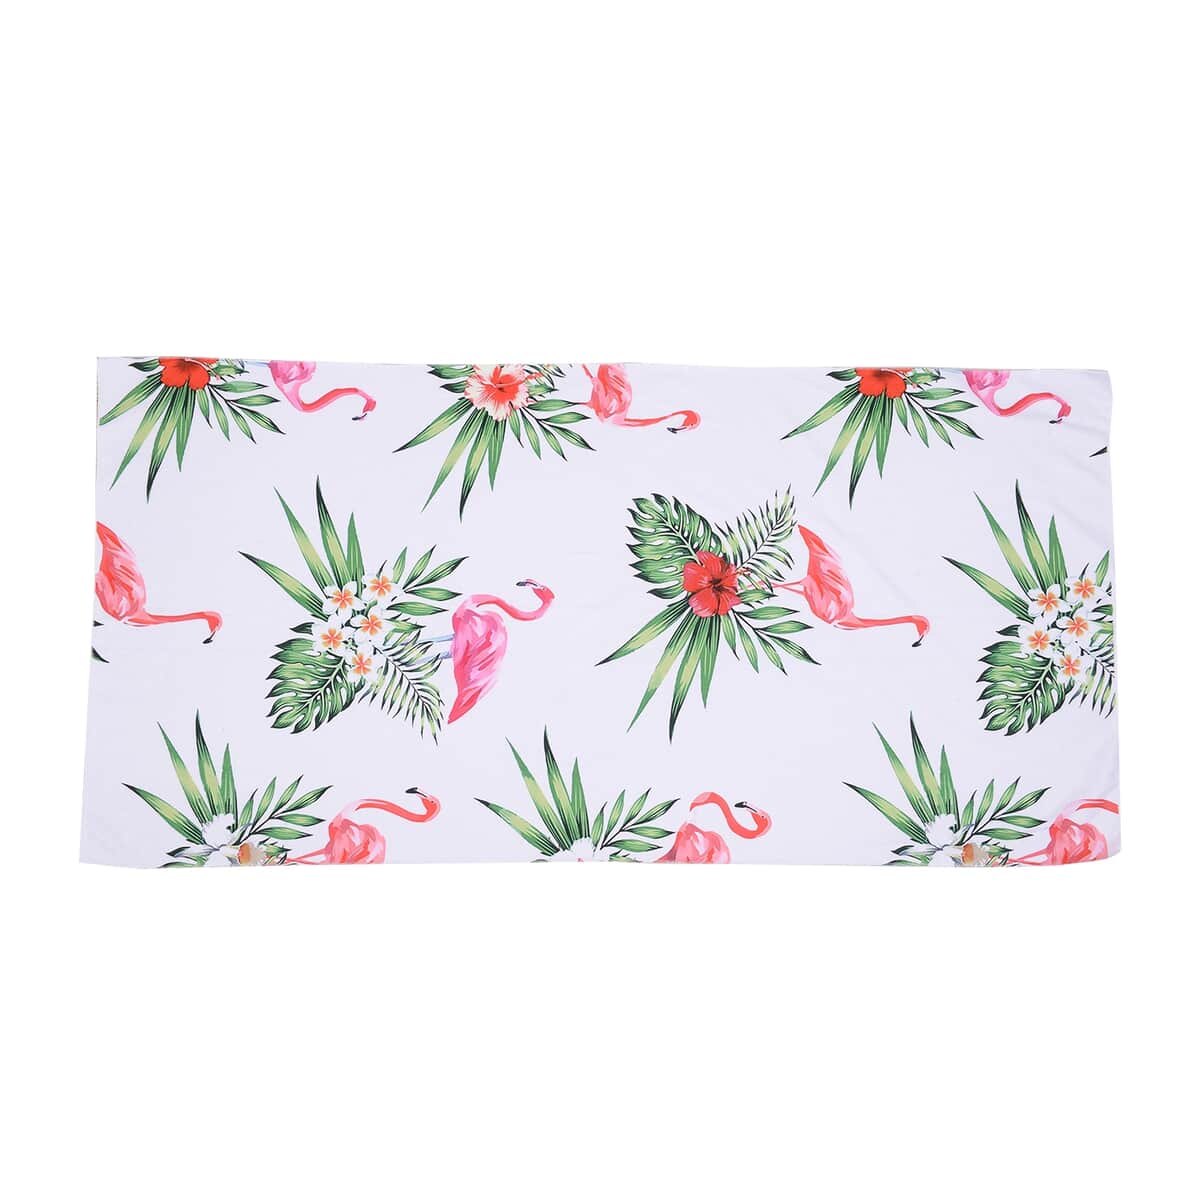 White, Flamingo Pattern Beach Towel (Polyester) image number 0